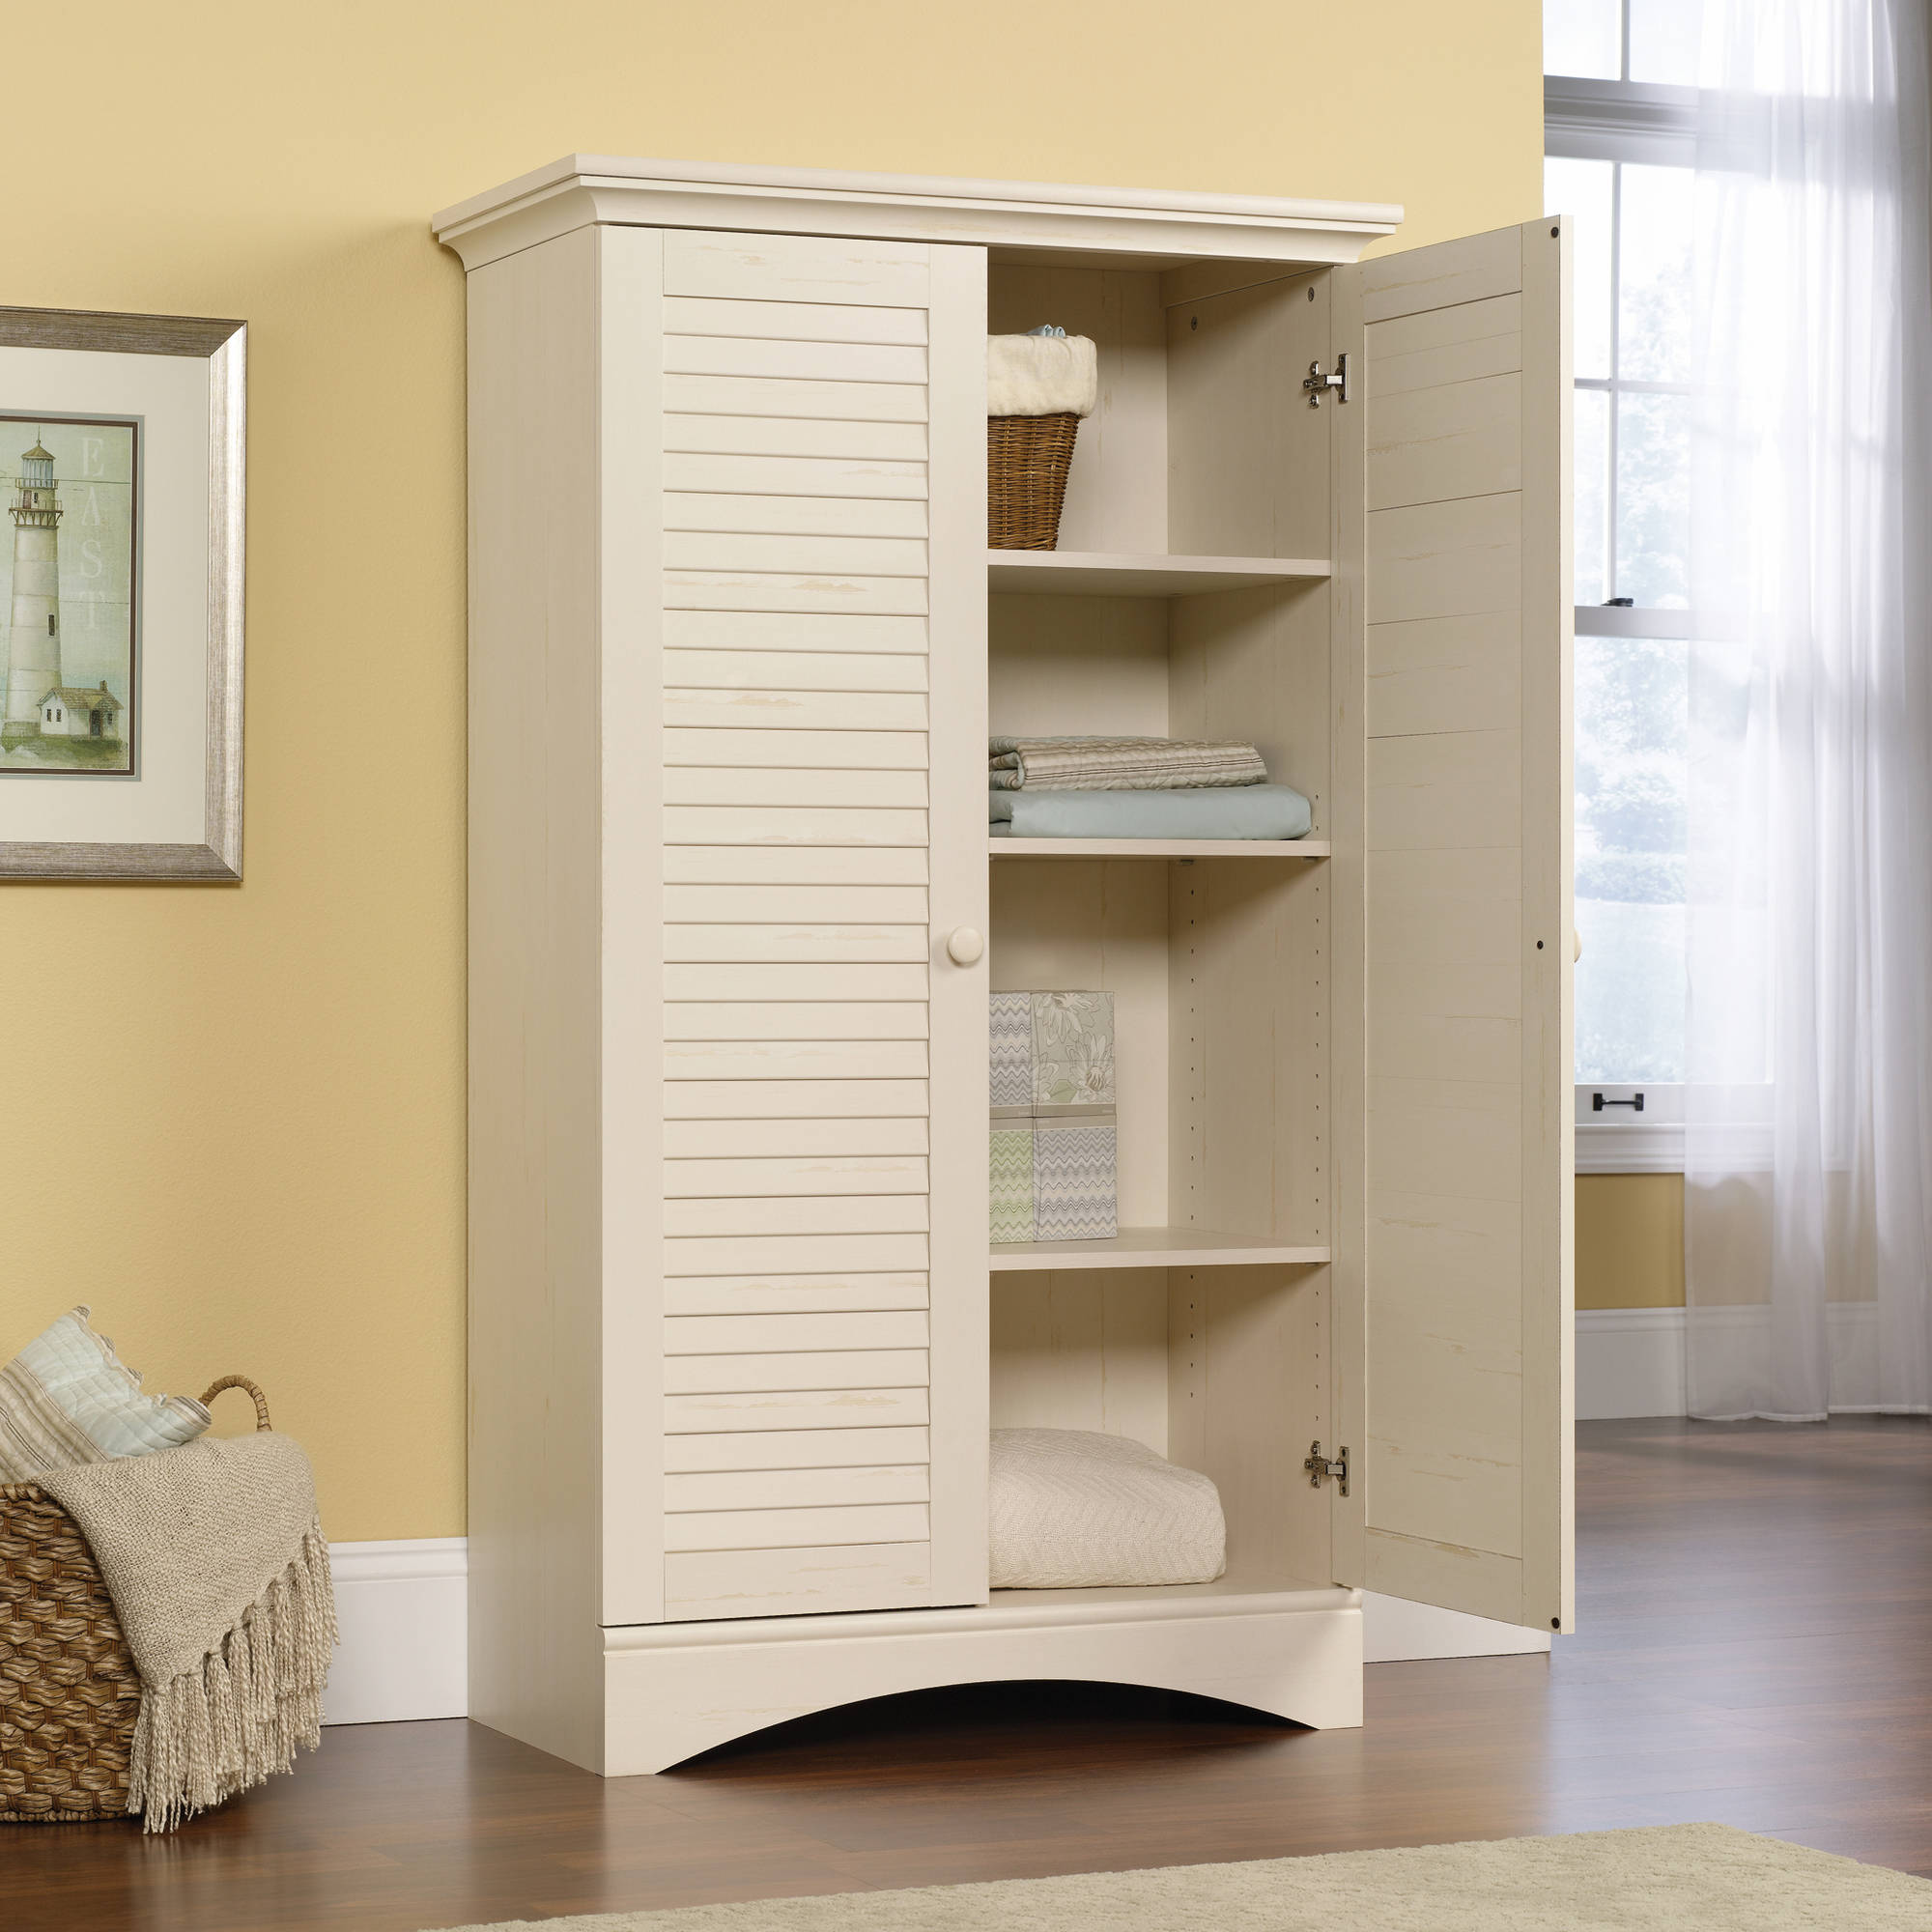 New Wood Storage Cabinets With Doors And Shelves Canada with Simple Decor